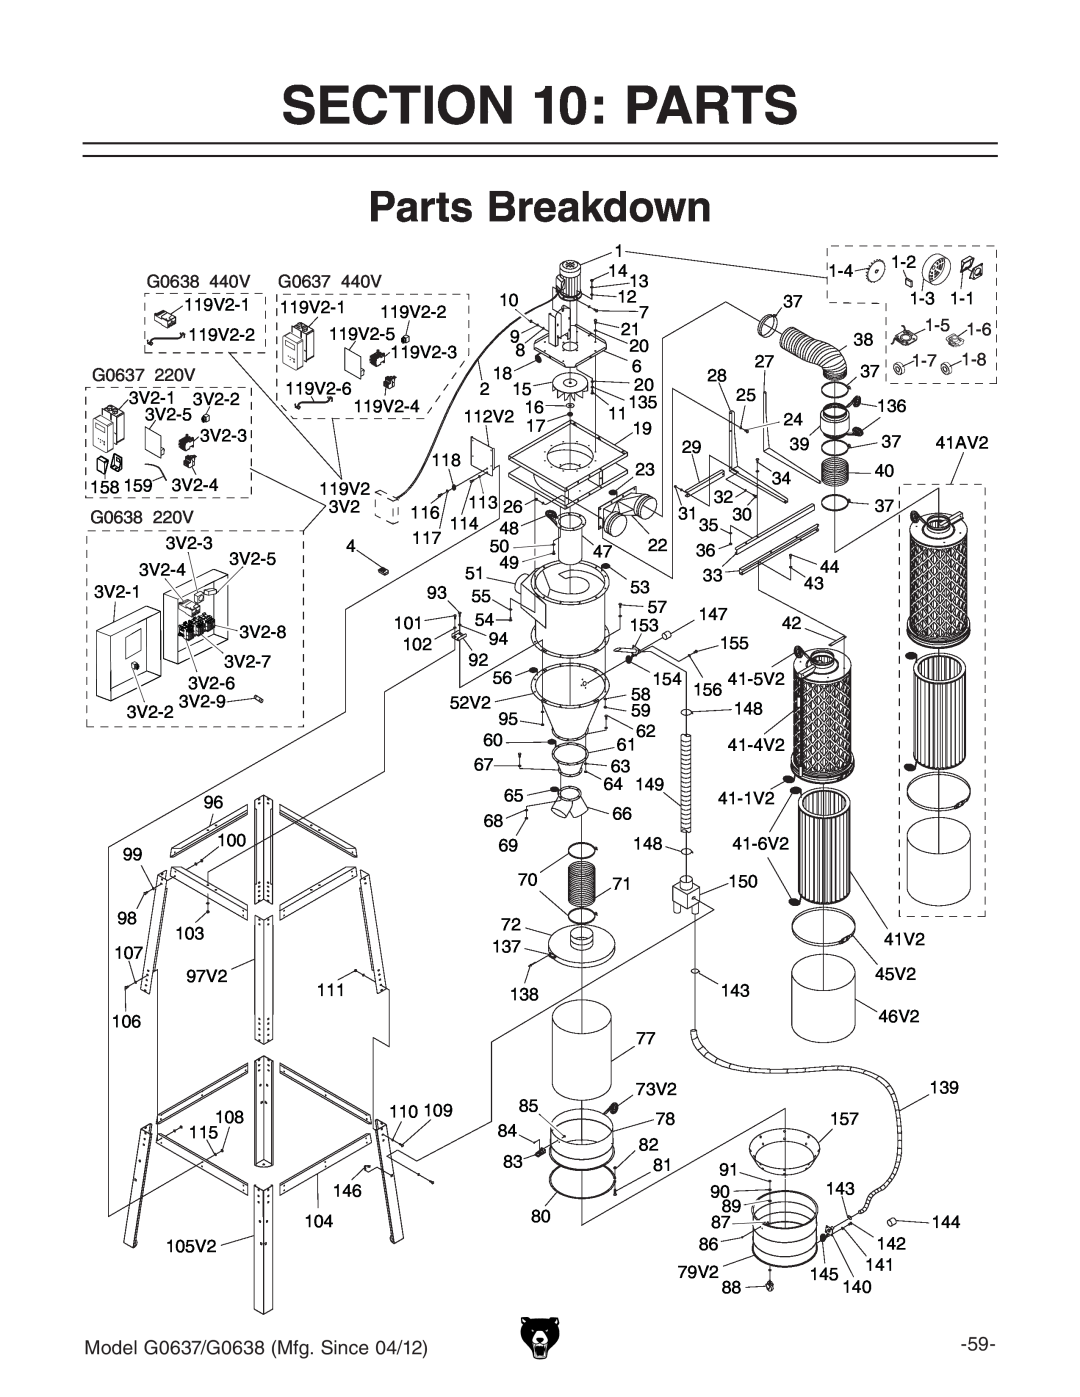 Grizzly G0637 owner manual Parts Breakdown 